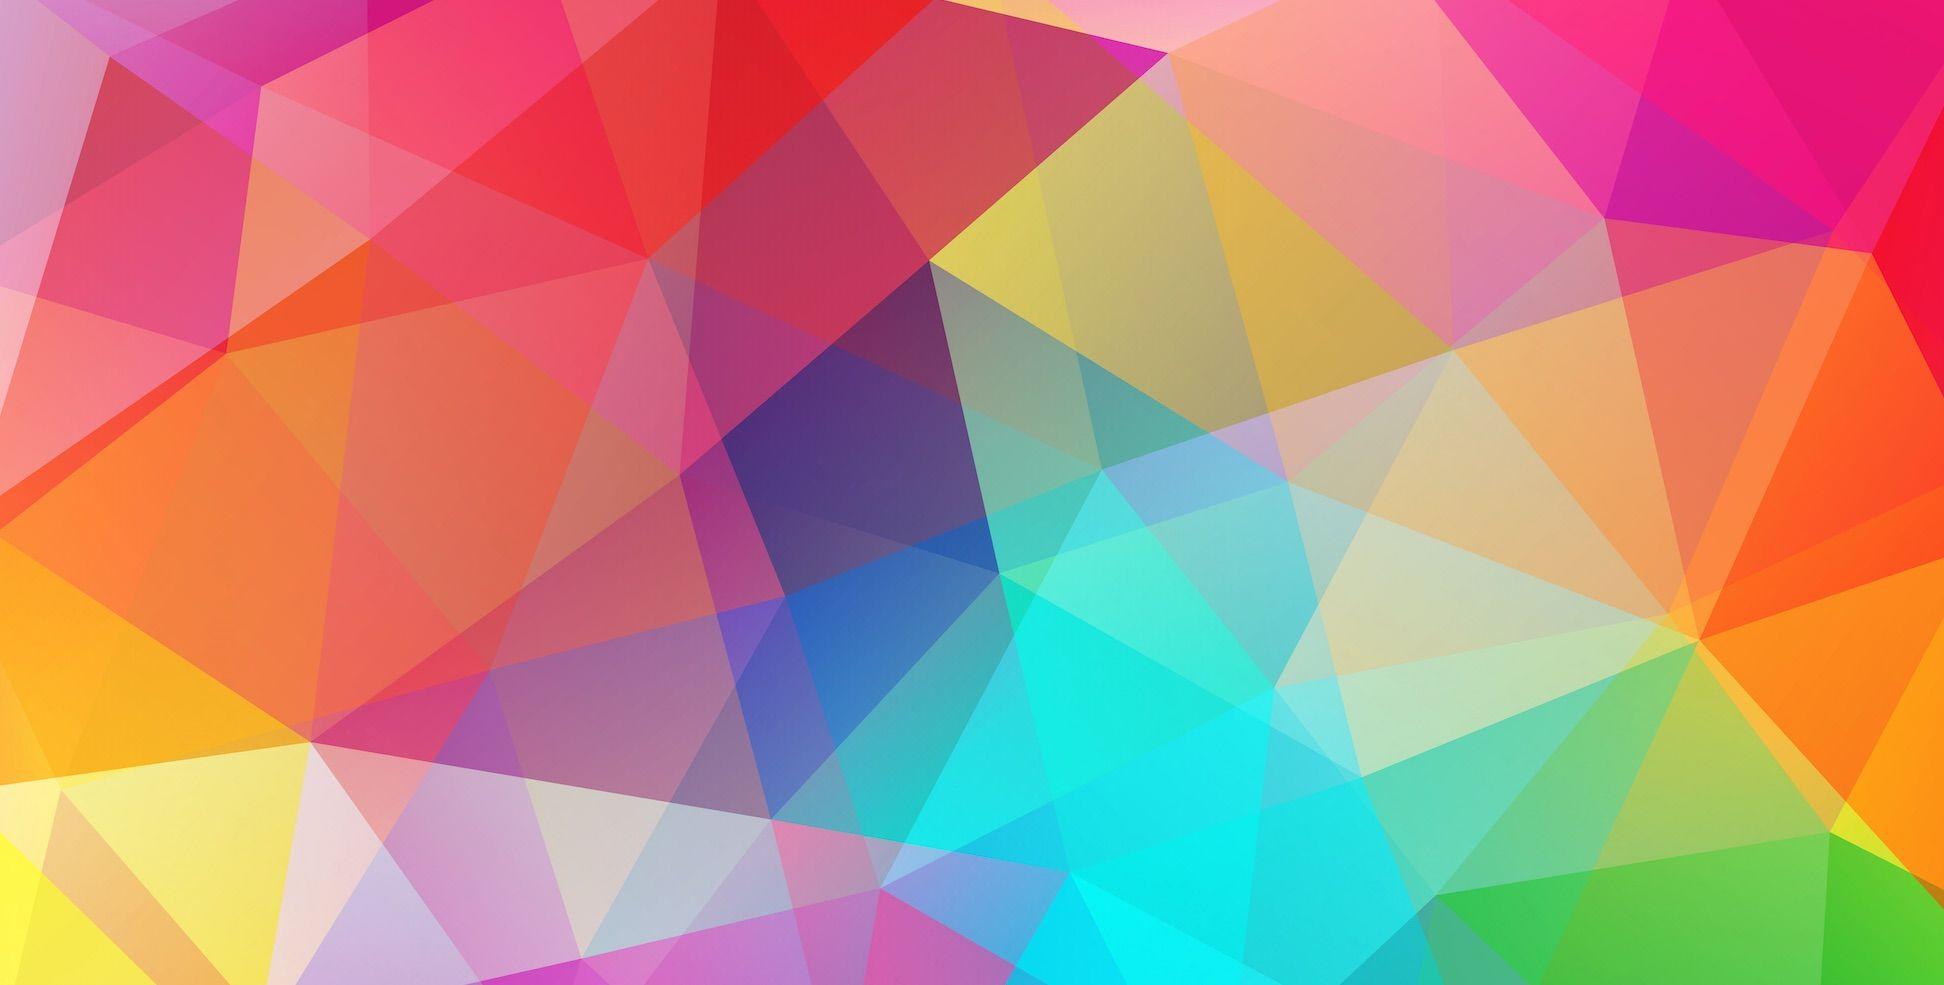 Web design color theory: how to create the right emotions with color